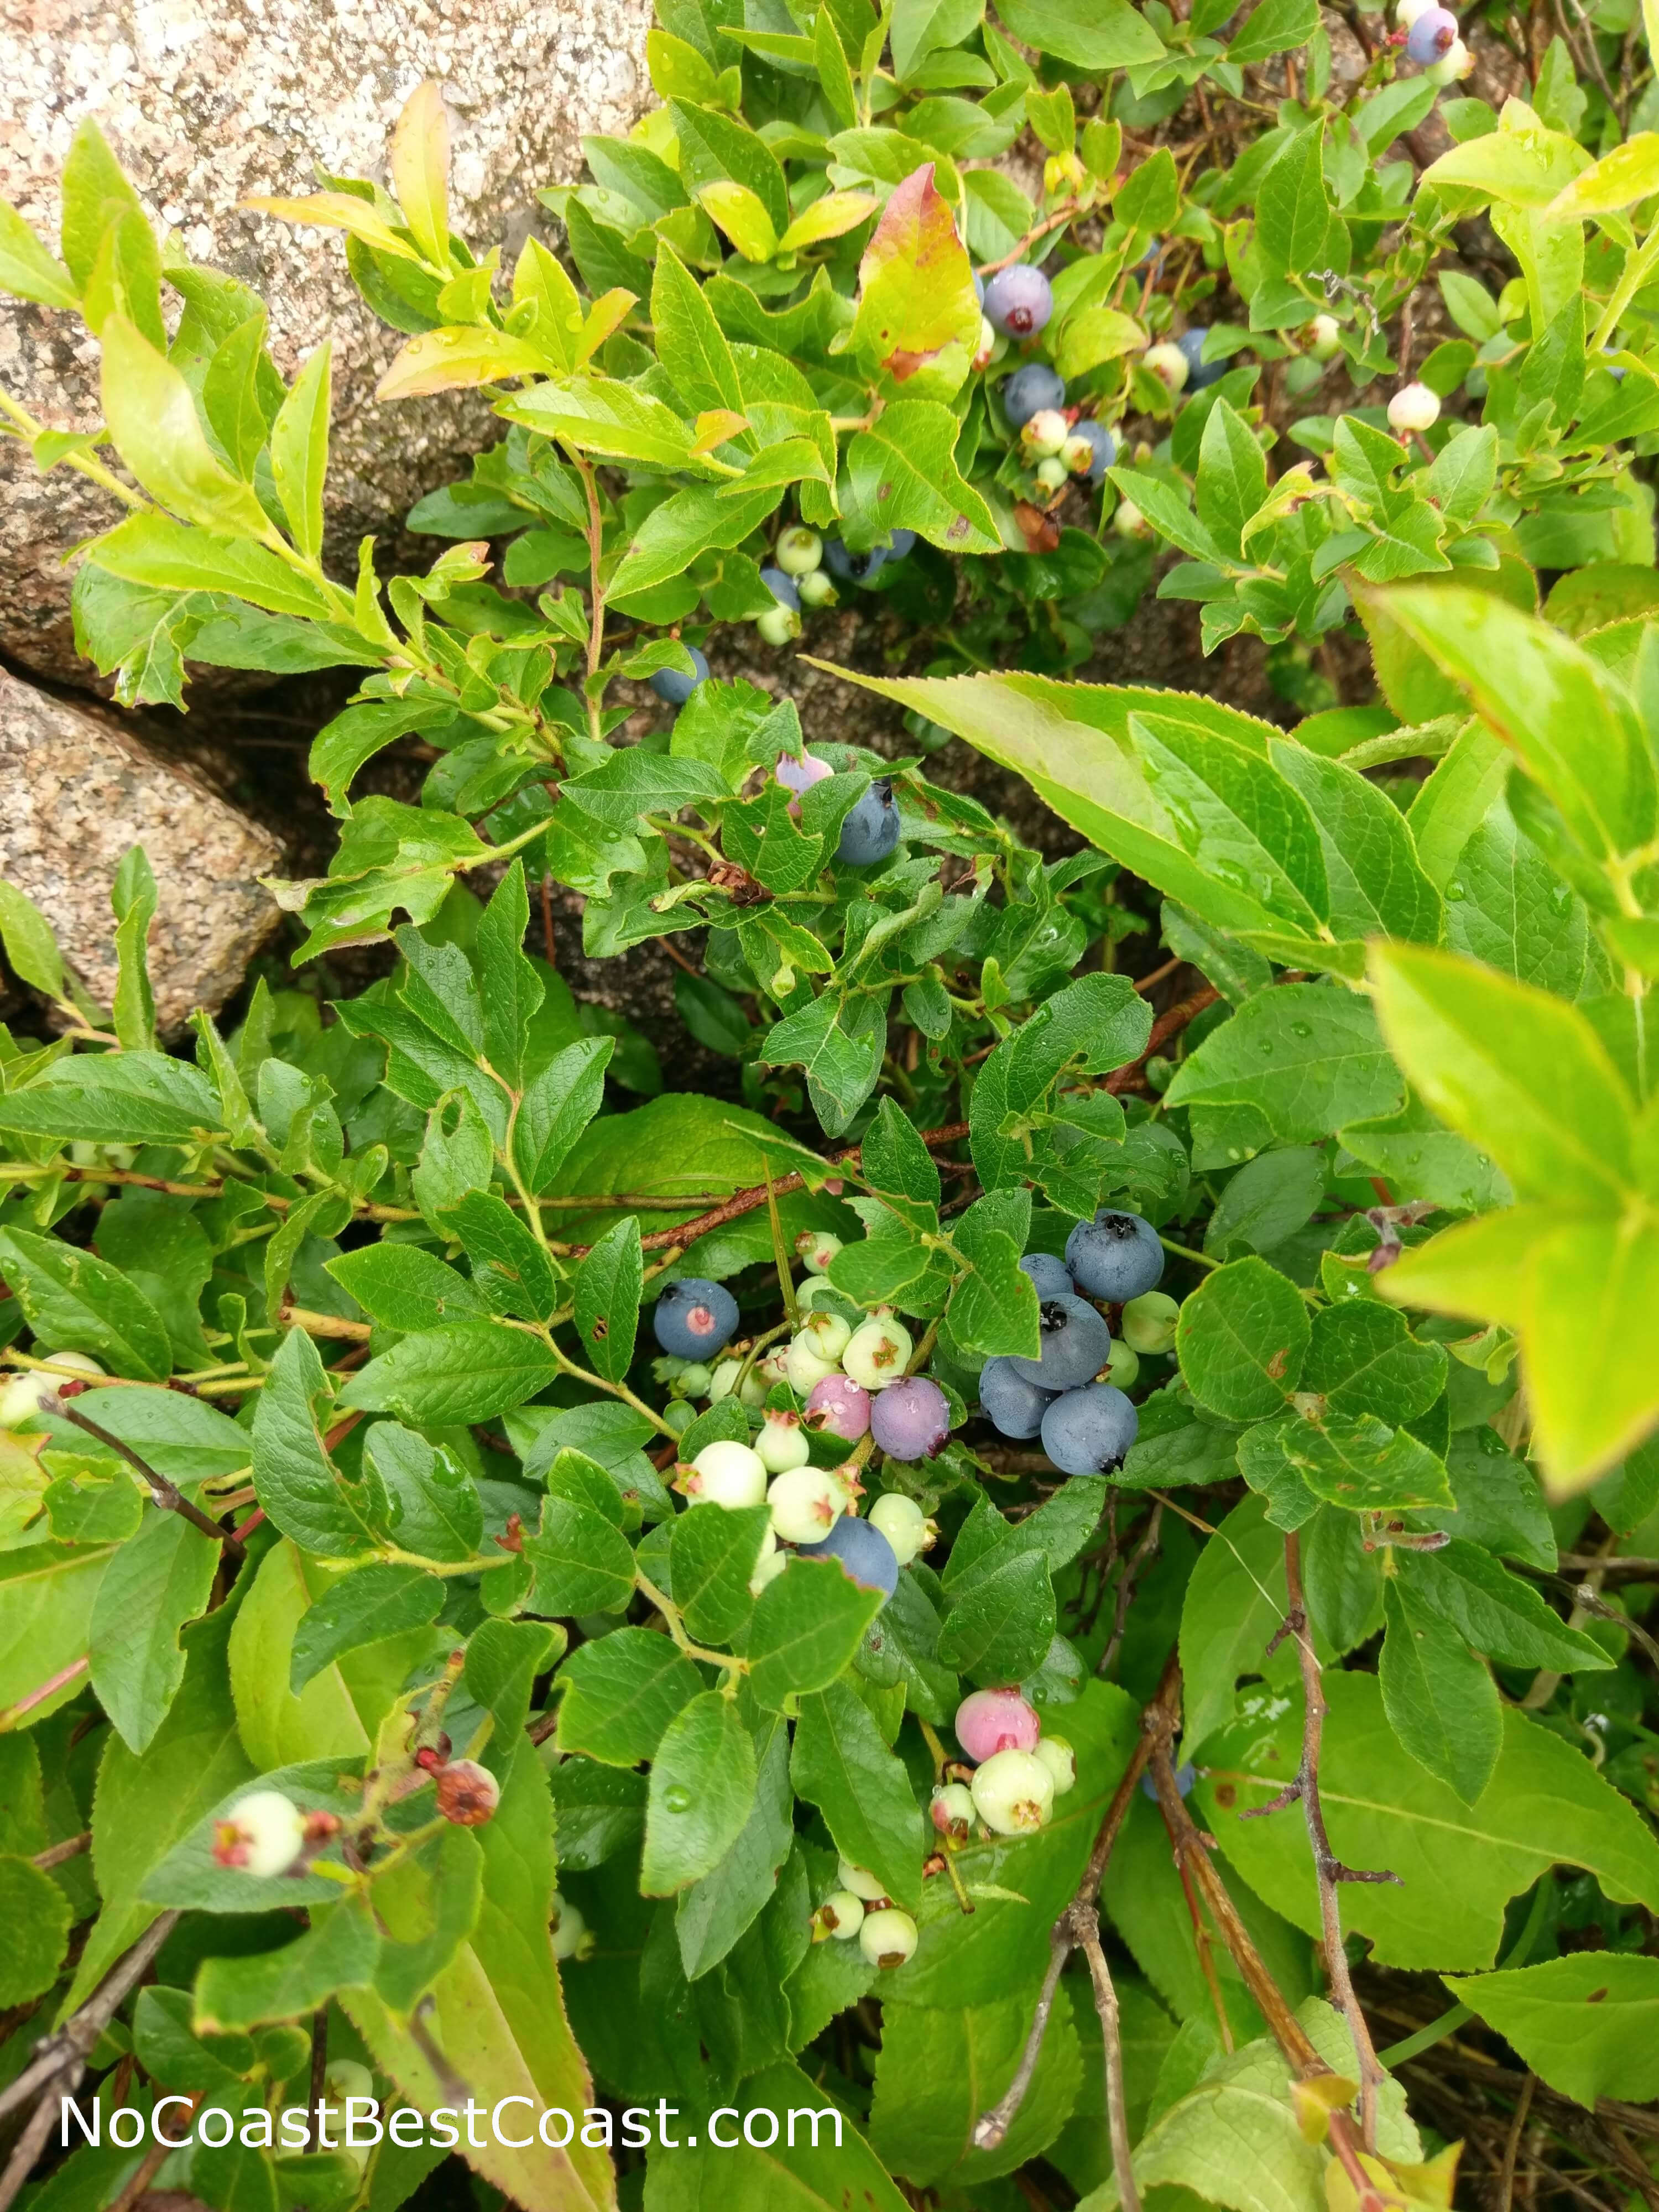 I ate way too many of these wild blueberries while on the trail